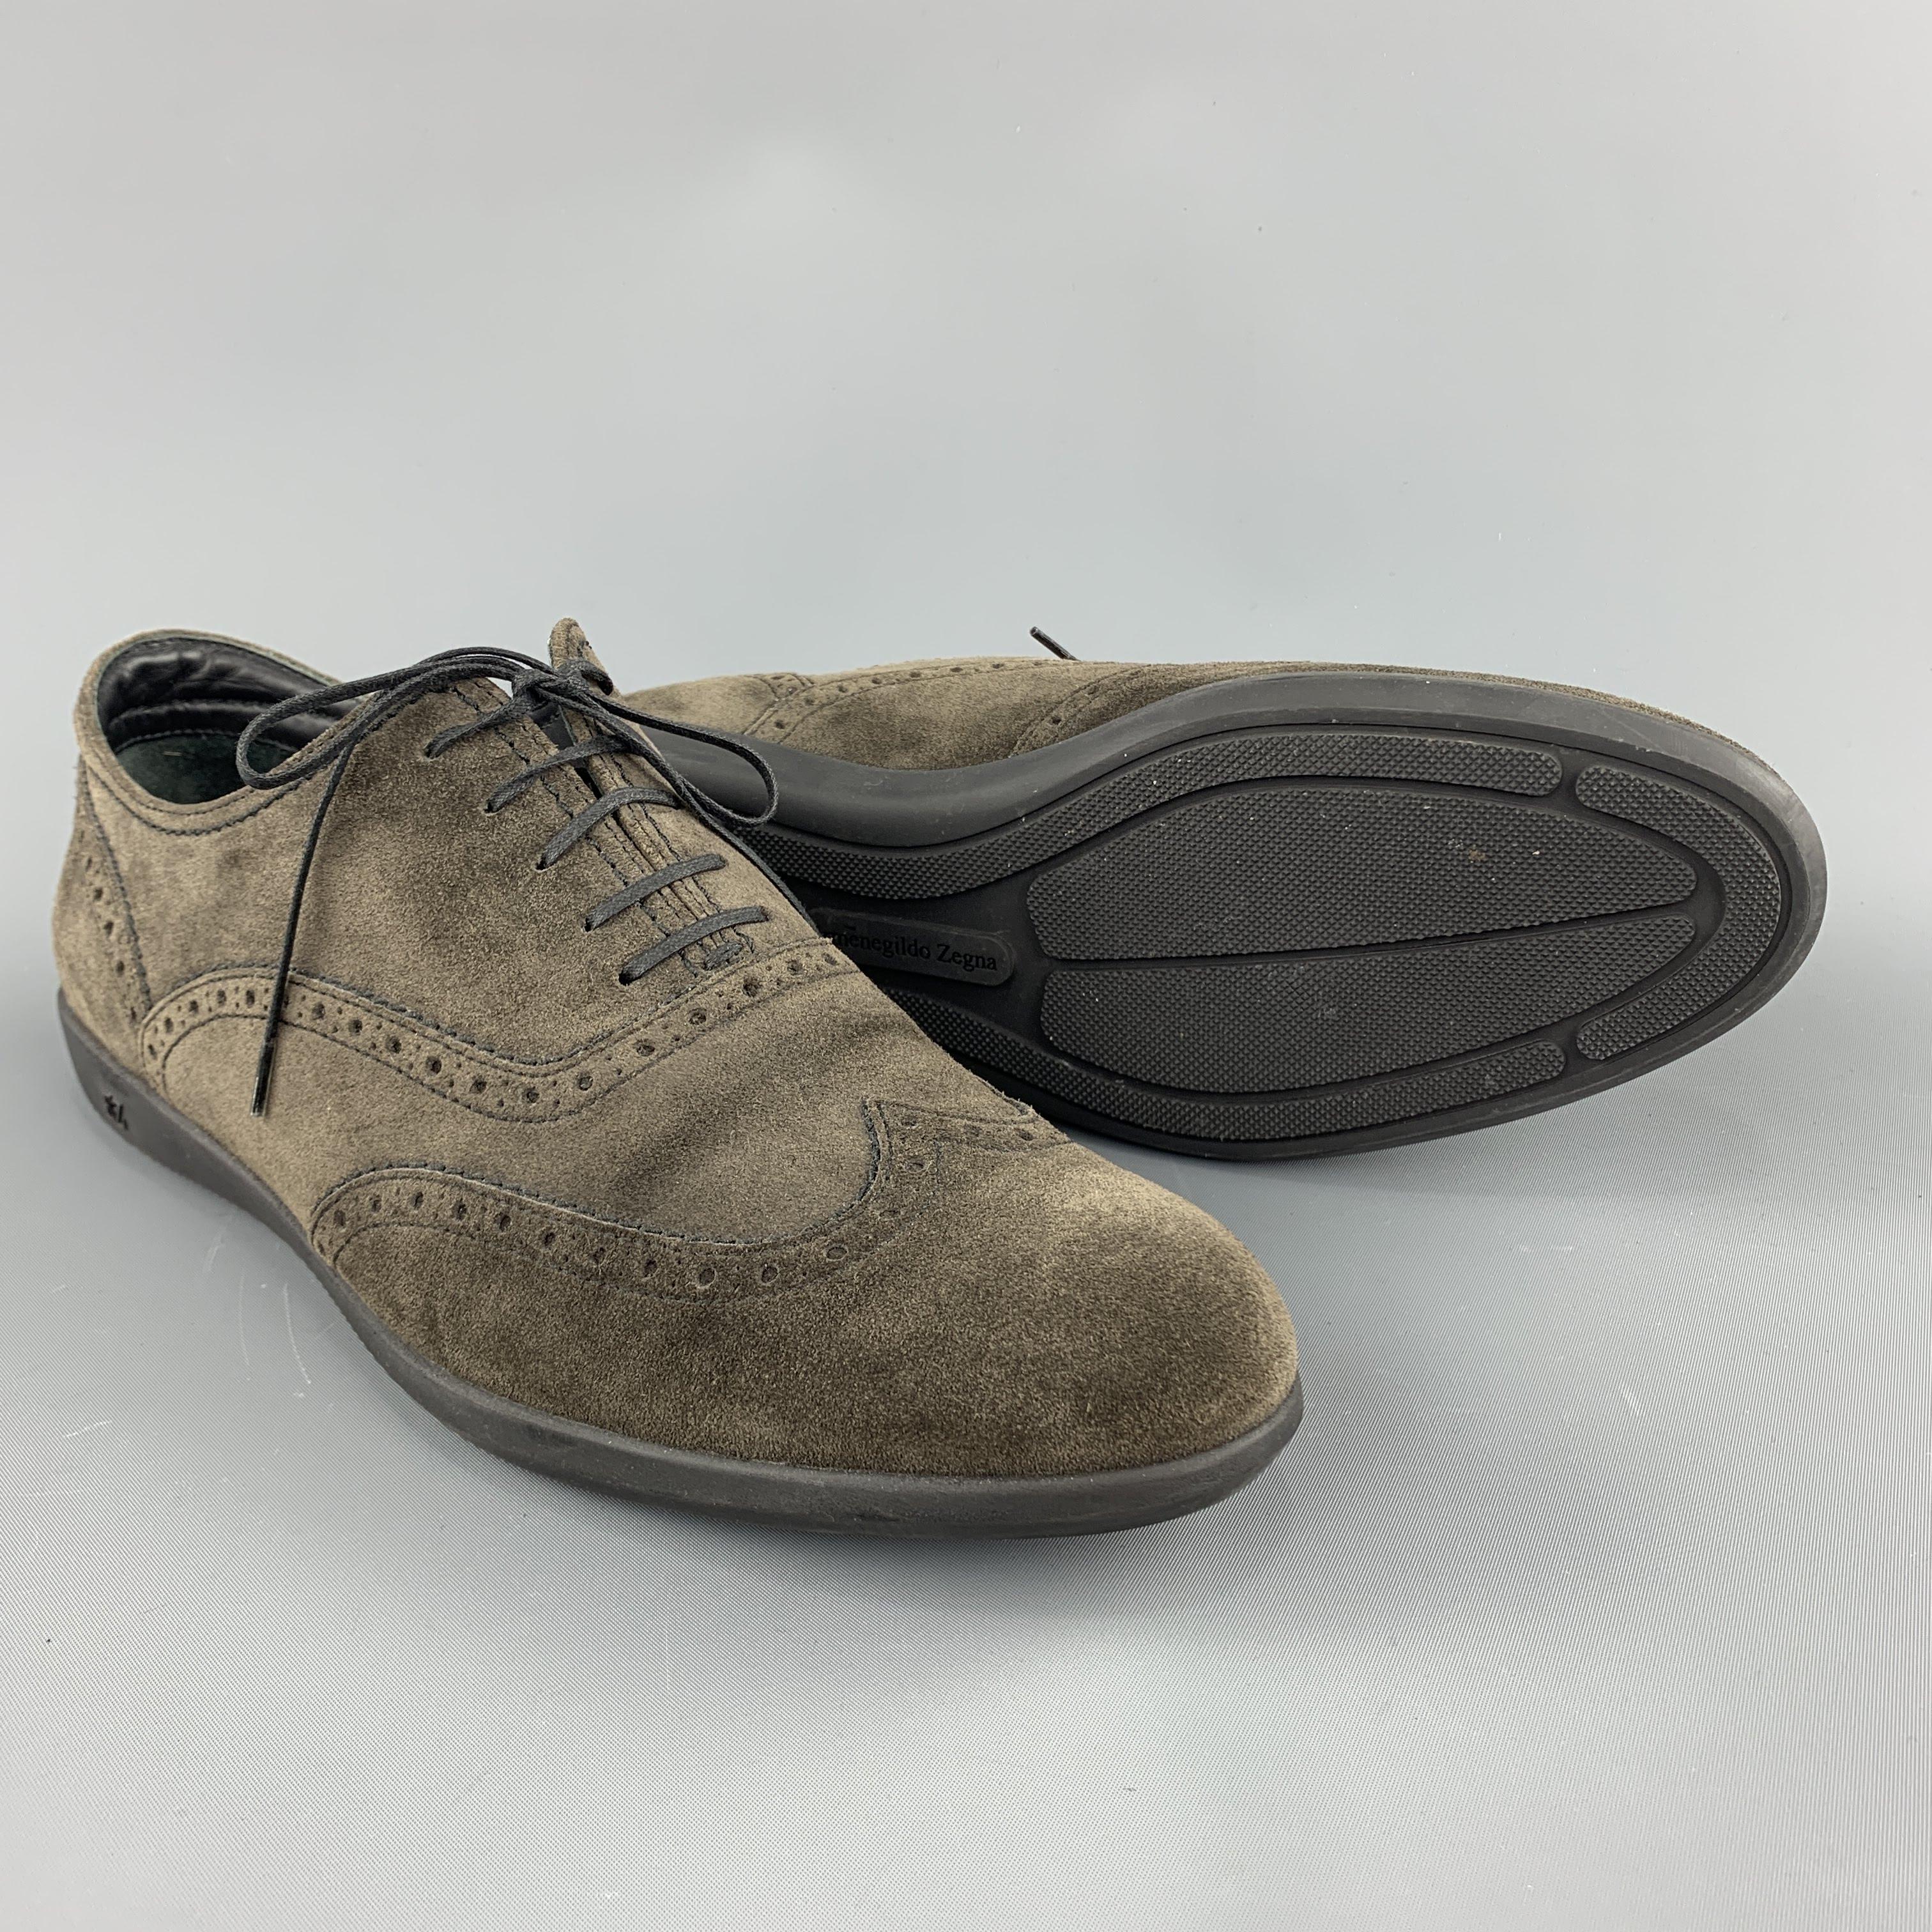 ERMENEGILDO ZEGNA brogues come in gray suede with a wingtip toe and rubber sole. Made in Italy.
 
Excellent Pre-Owned Condition.
Marked: UK 8.5
 
Outsole: 12 x 4 in.